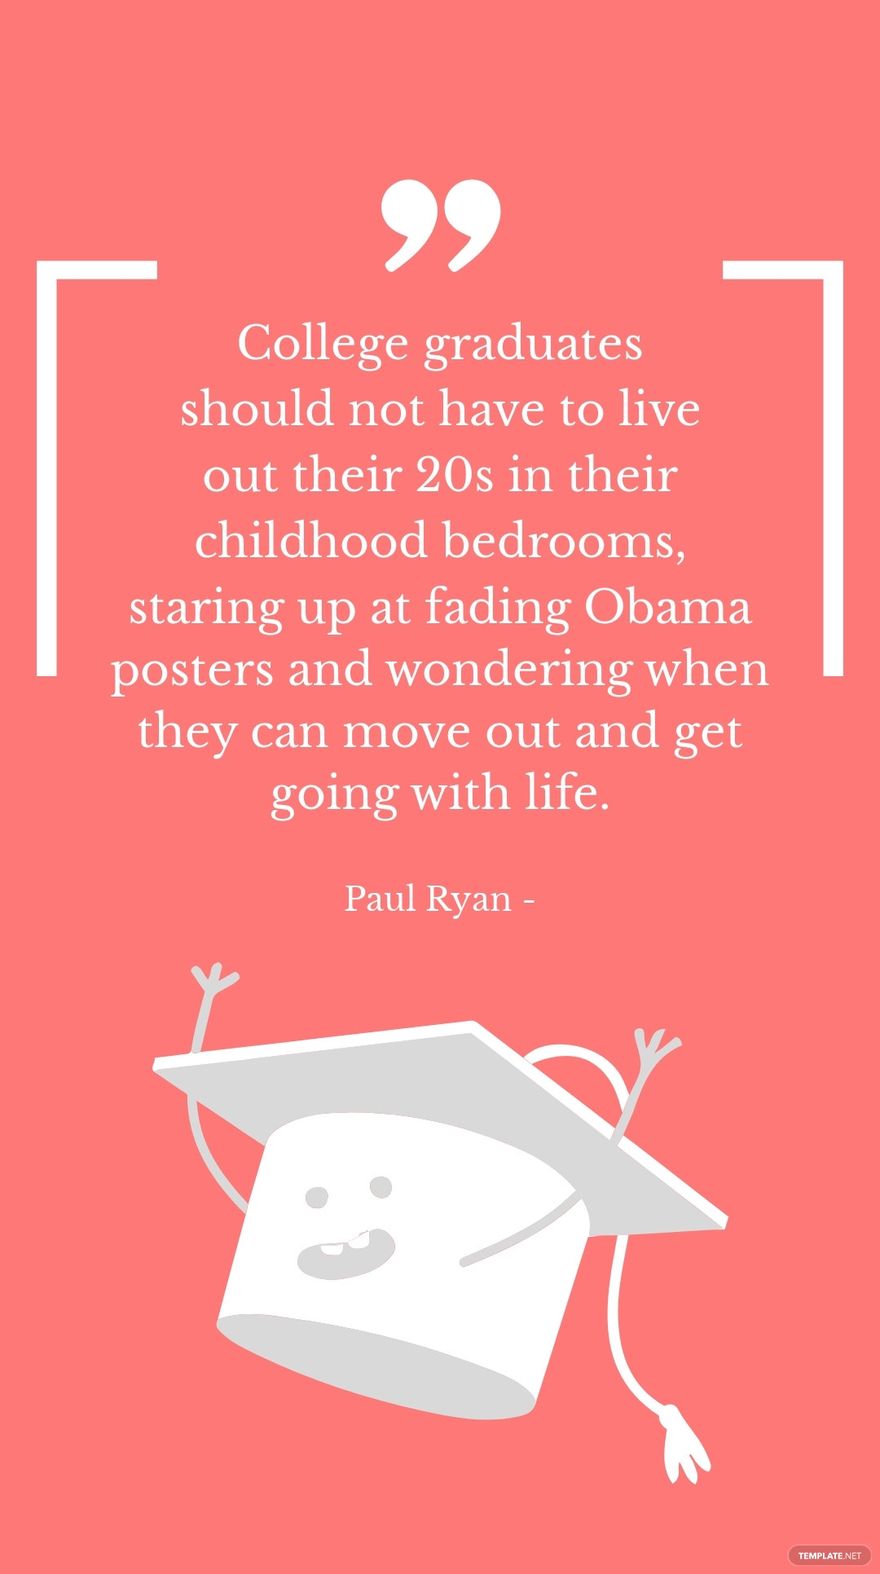 Paul Ryan - College graduates should not have to live out their 20s in their childhood bedrooms, staring up at fading Obama posters and wondering when they can move out and get going with life.